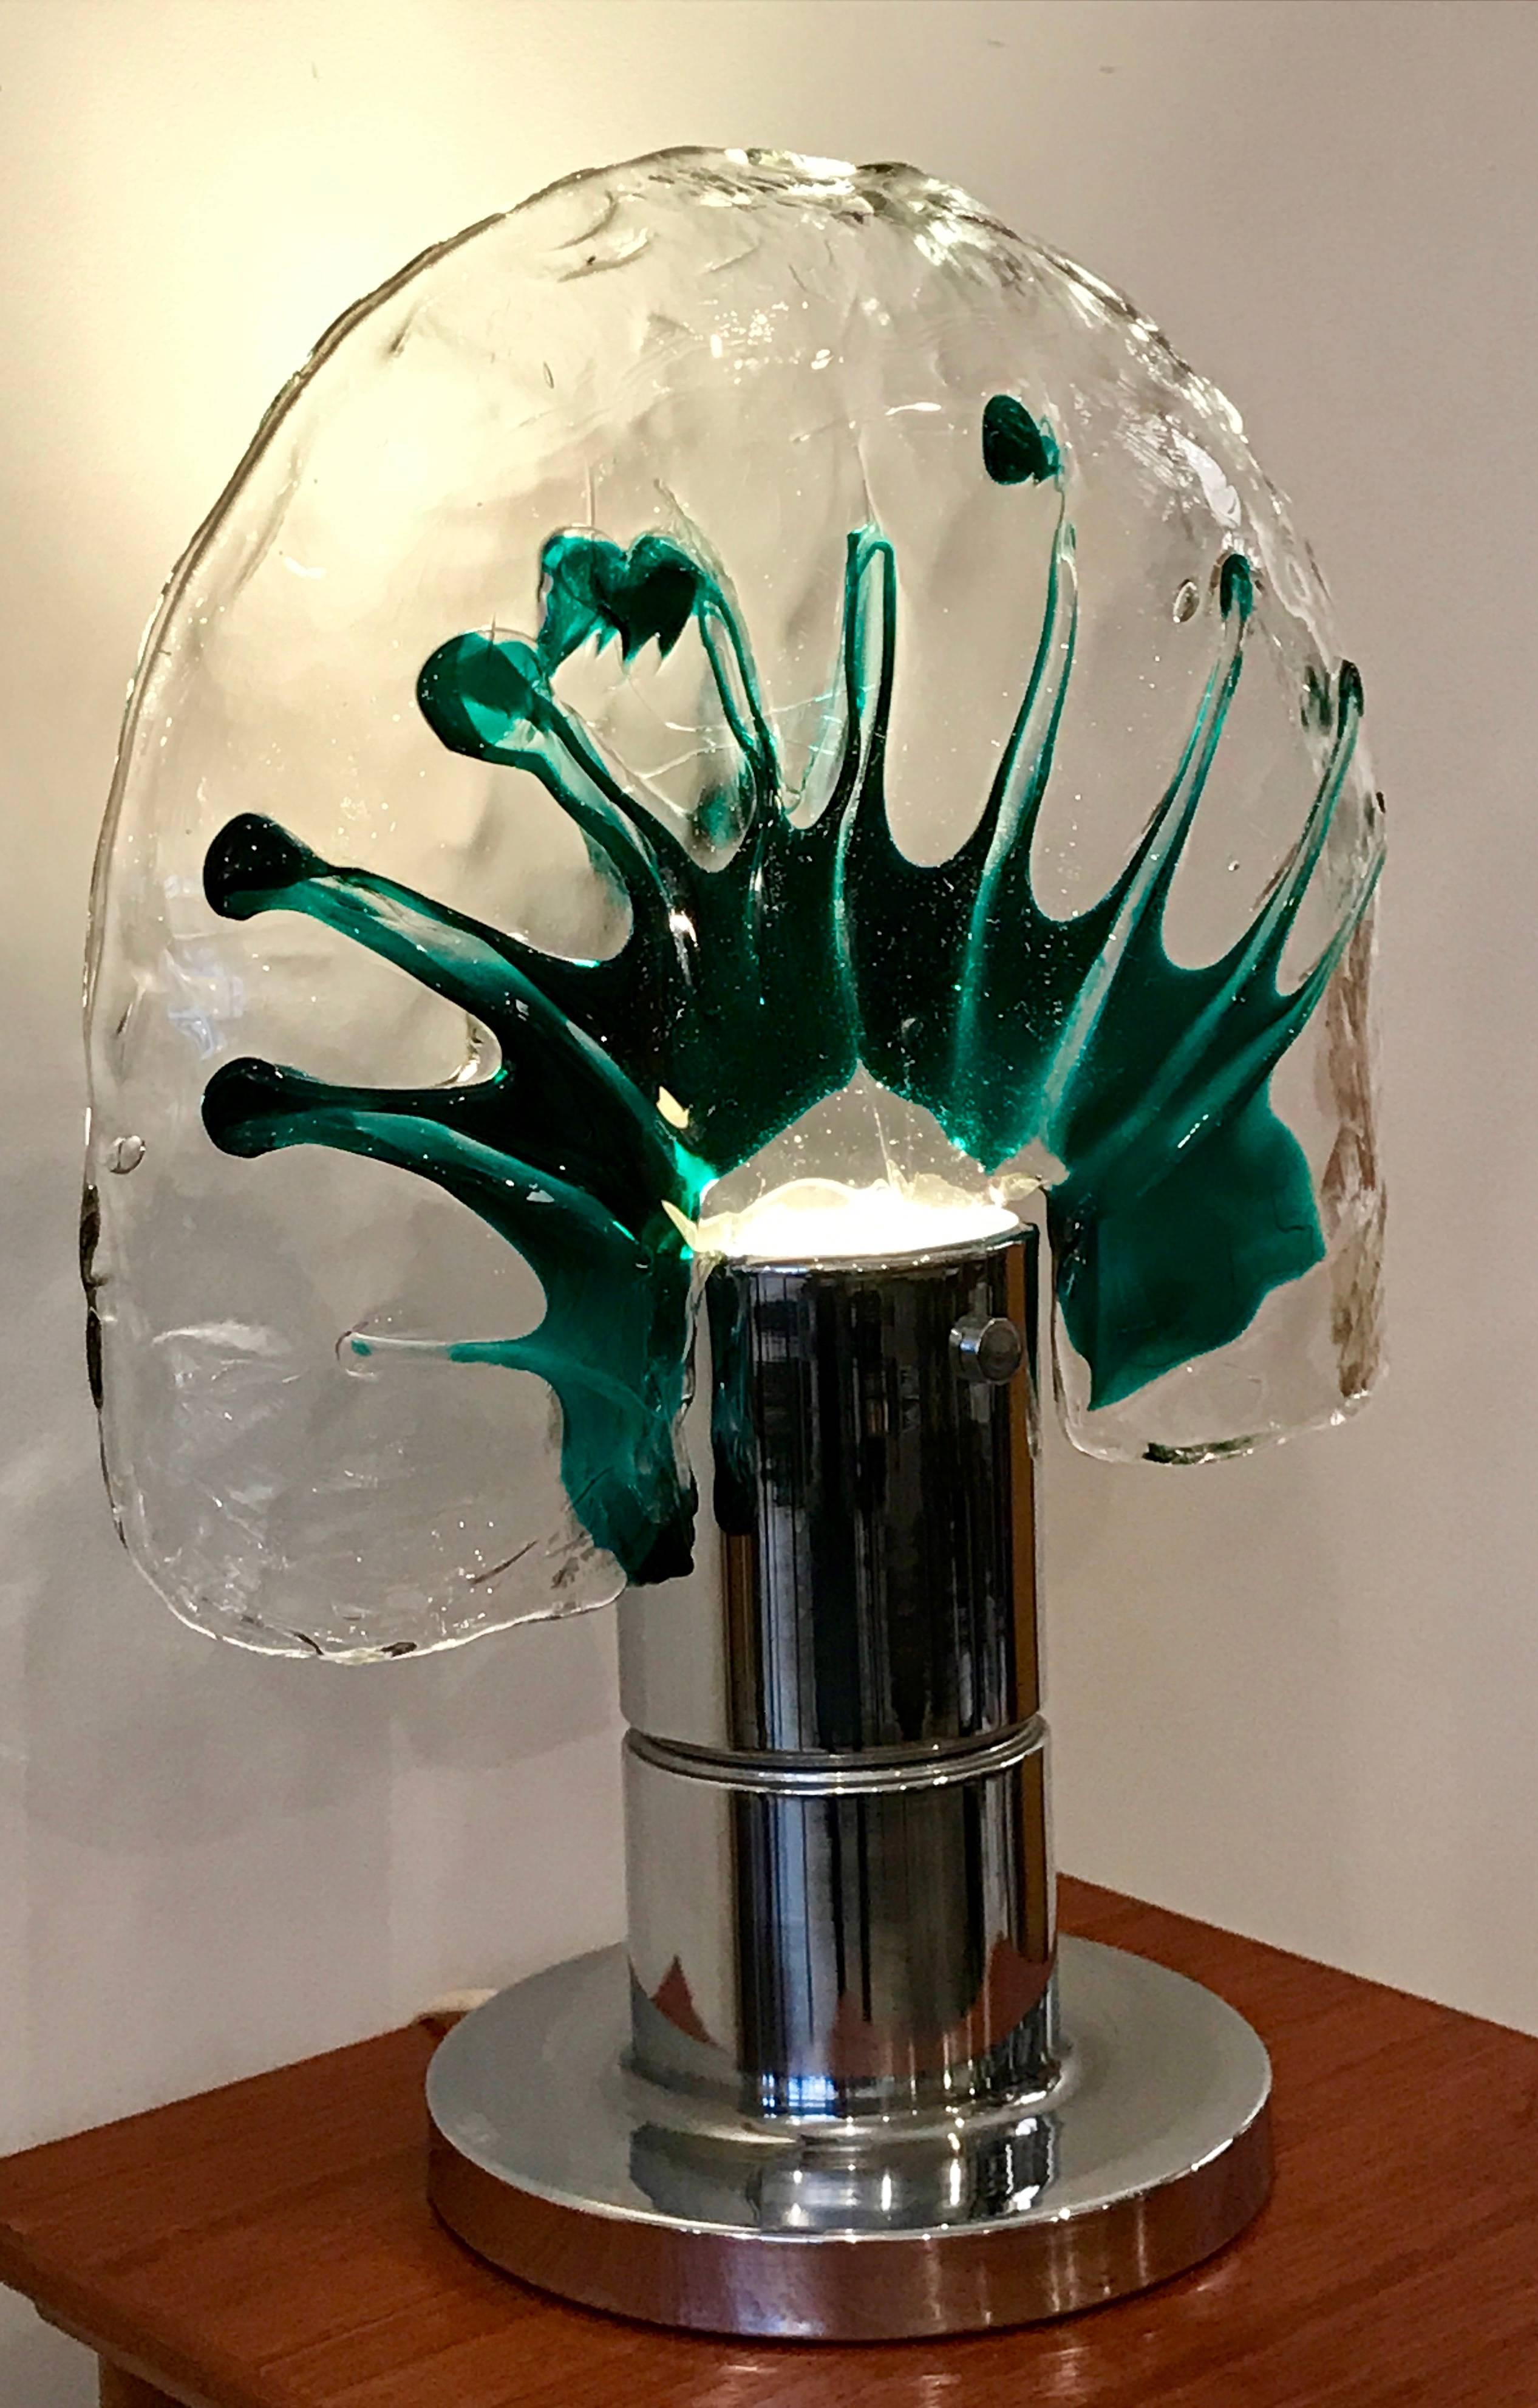 Very unusual handblown Murano art glass shape mounted on chrome cylinder base. Thick clear glass with vibrant green accents.